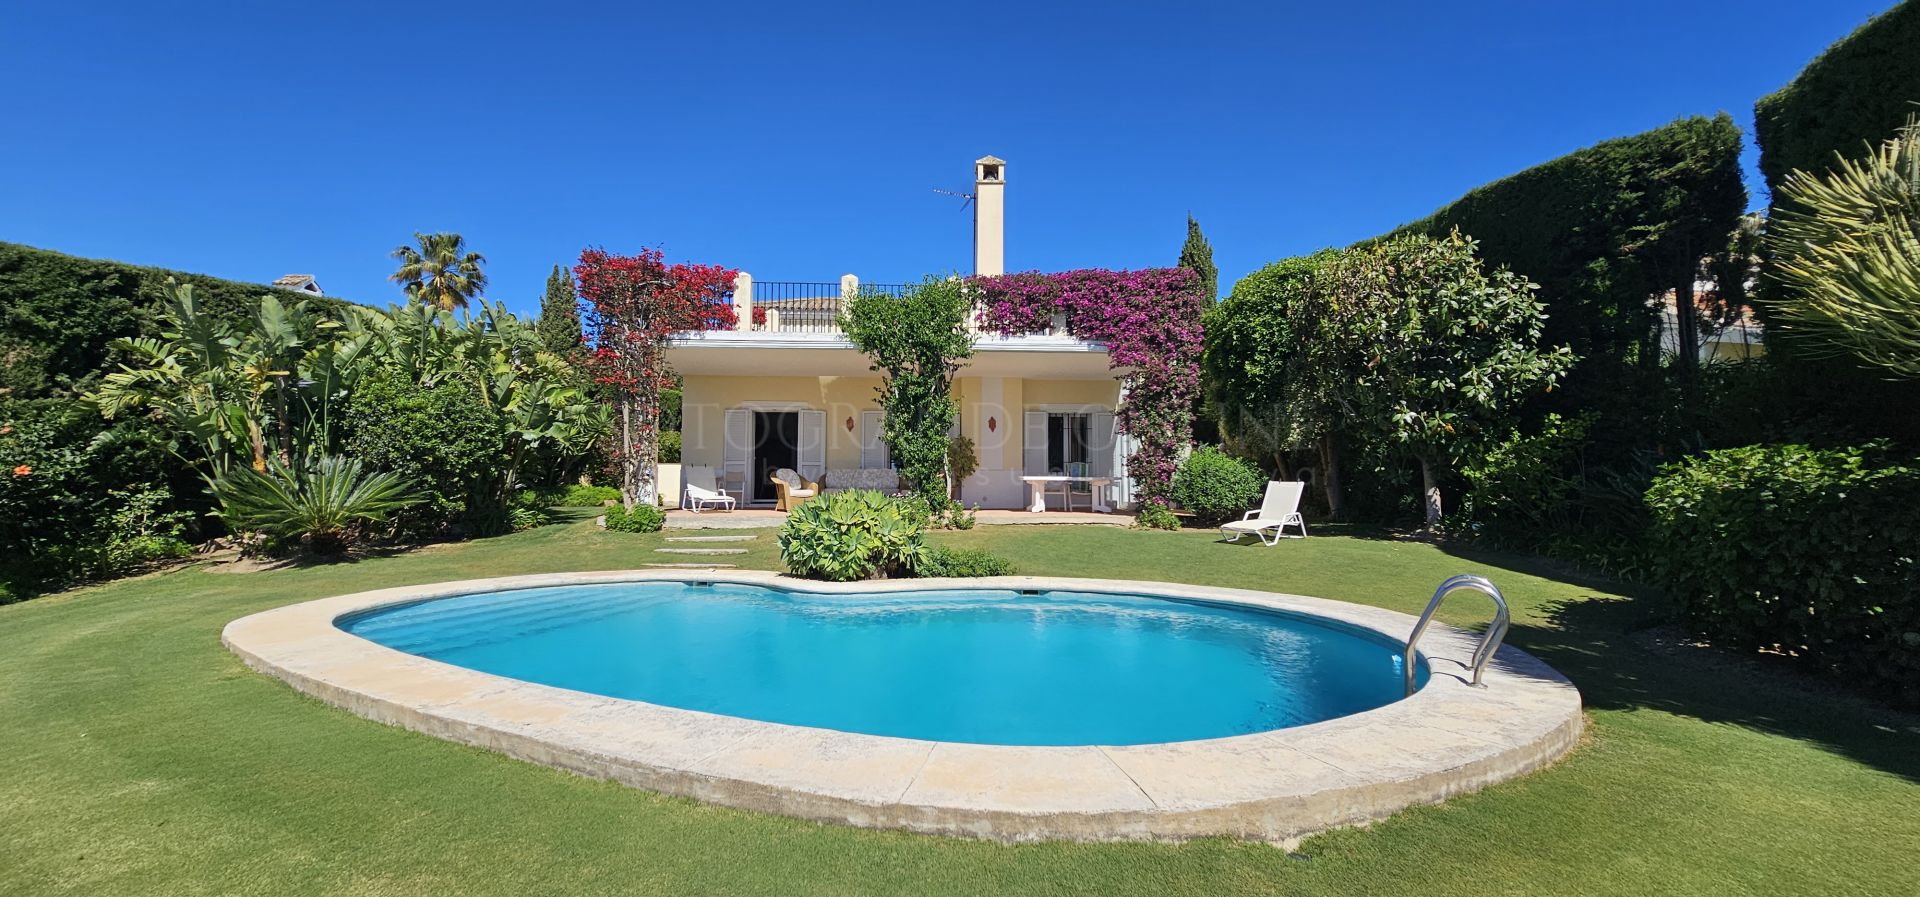 Beautiful Villa in the upper area of Sotogrande with wonderful views.